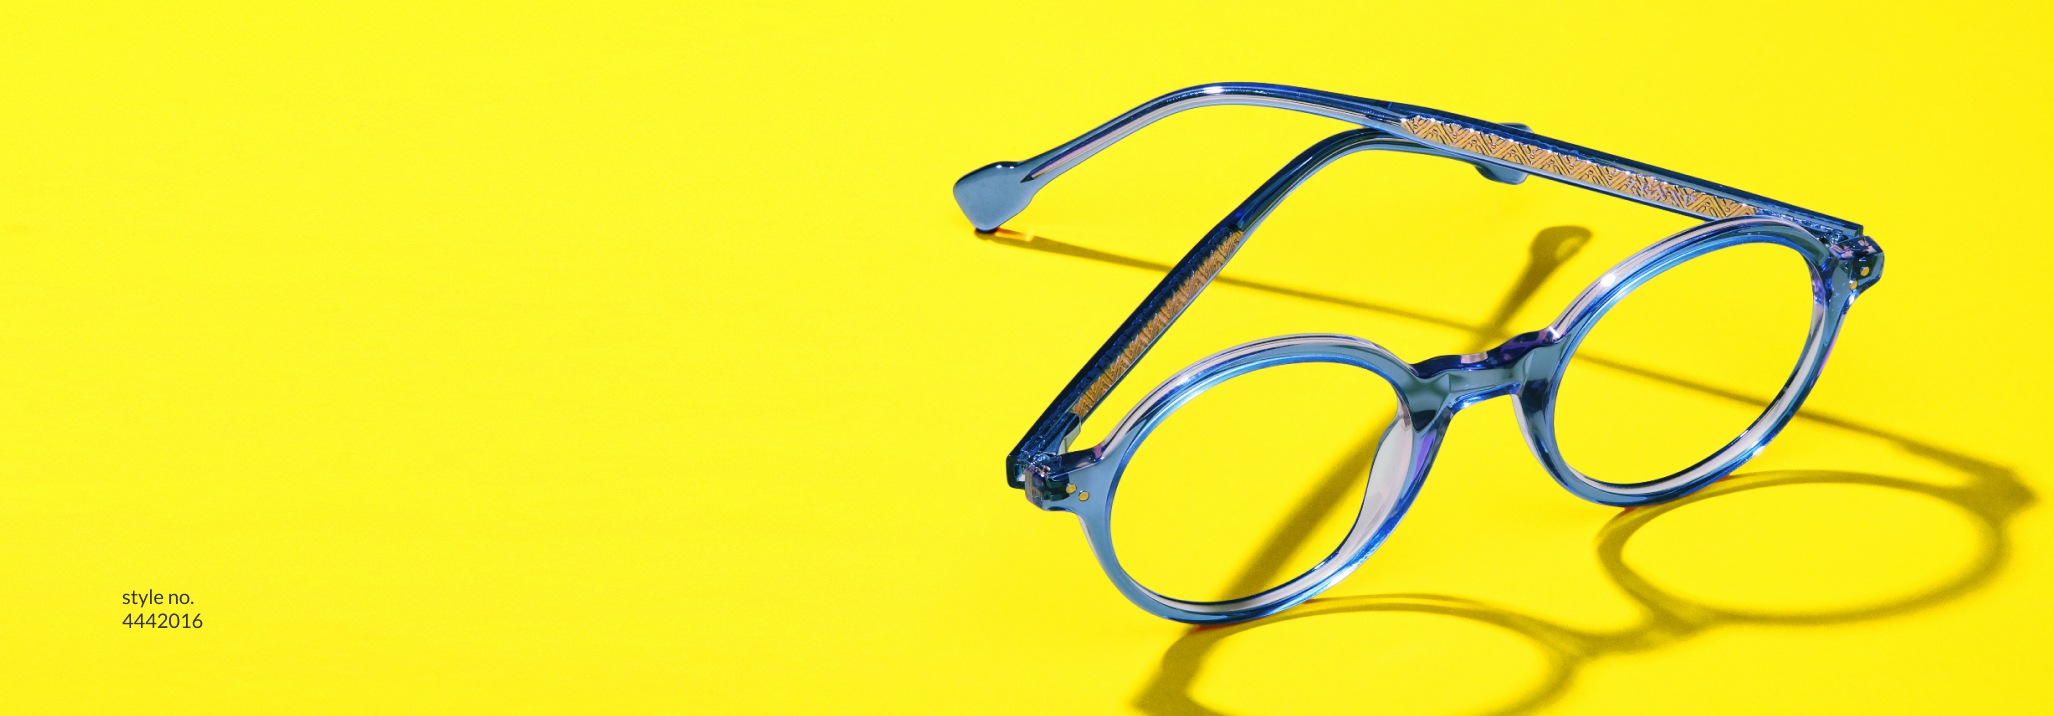 Image of Zenni glasses #4442016 against a bright yellow background, casting a shadow.